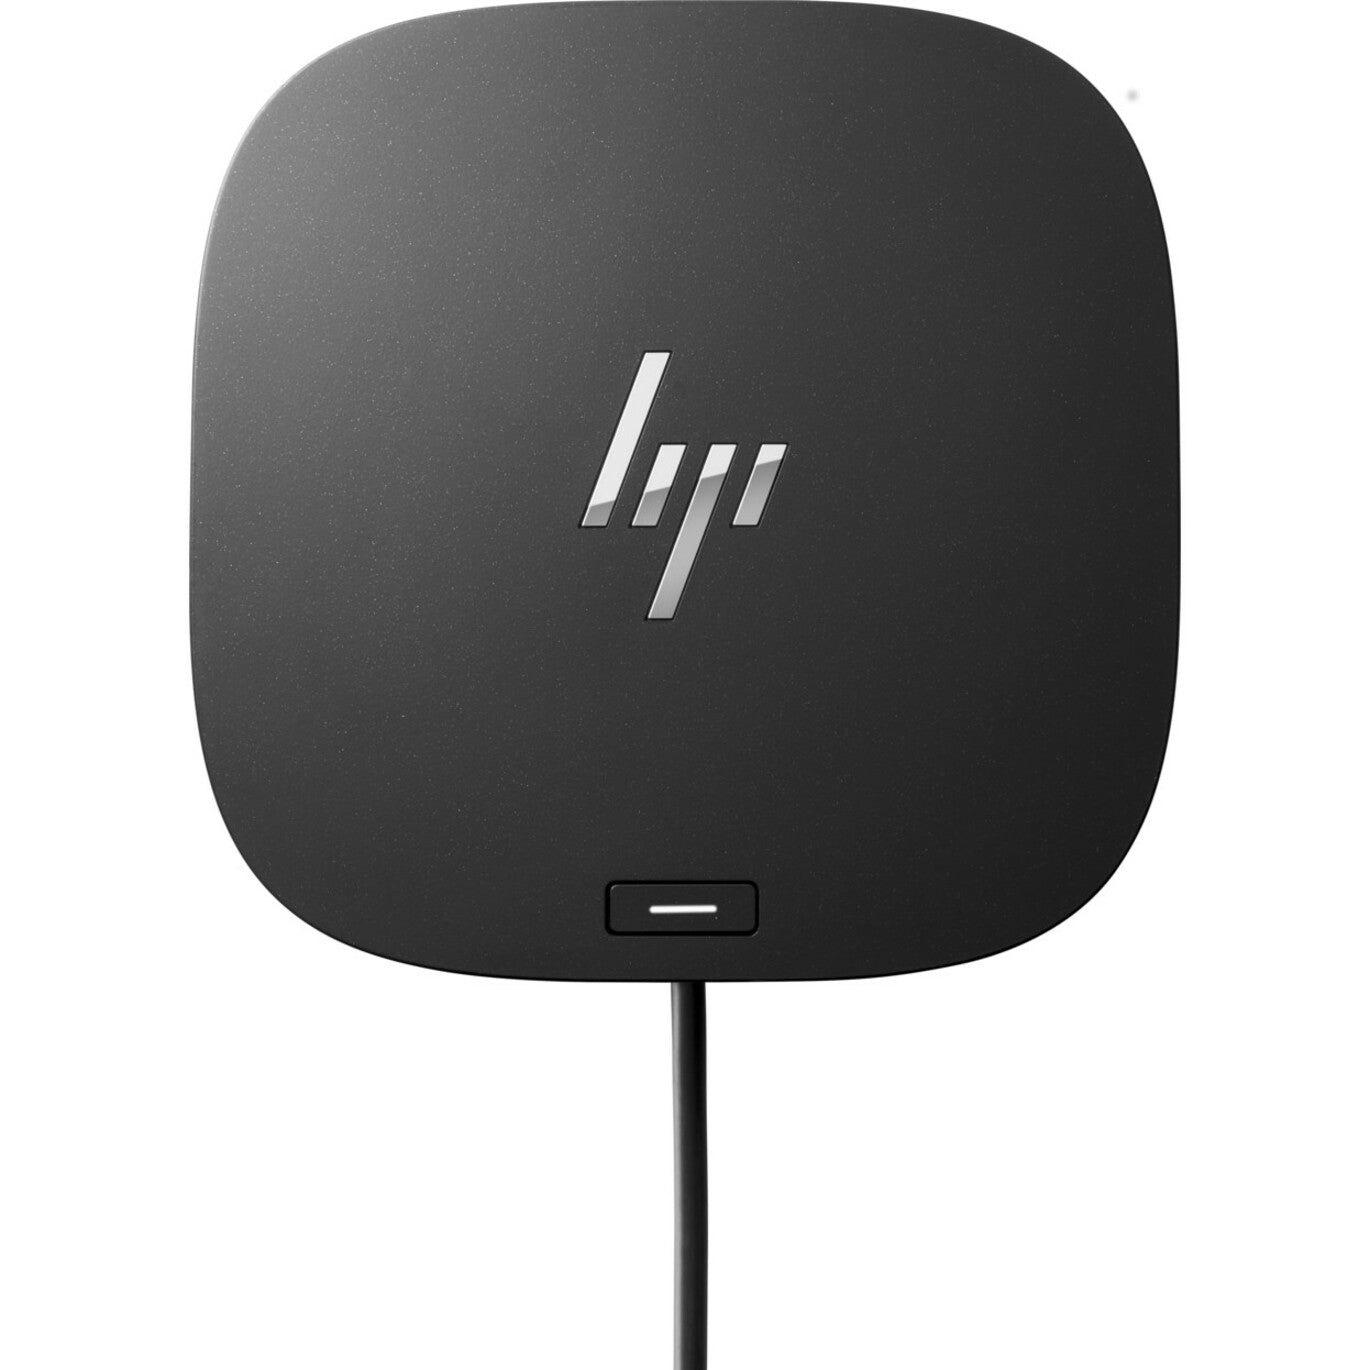 HP USB-C Dock G5 Essential Dock, 120W Power Delivery, HDMI, USB Type-A/C, DisplayPort, Ethernet